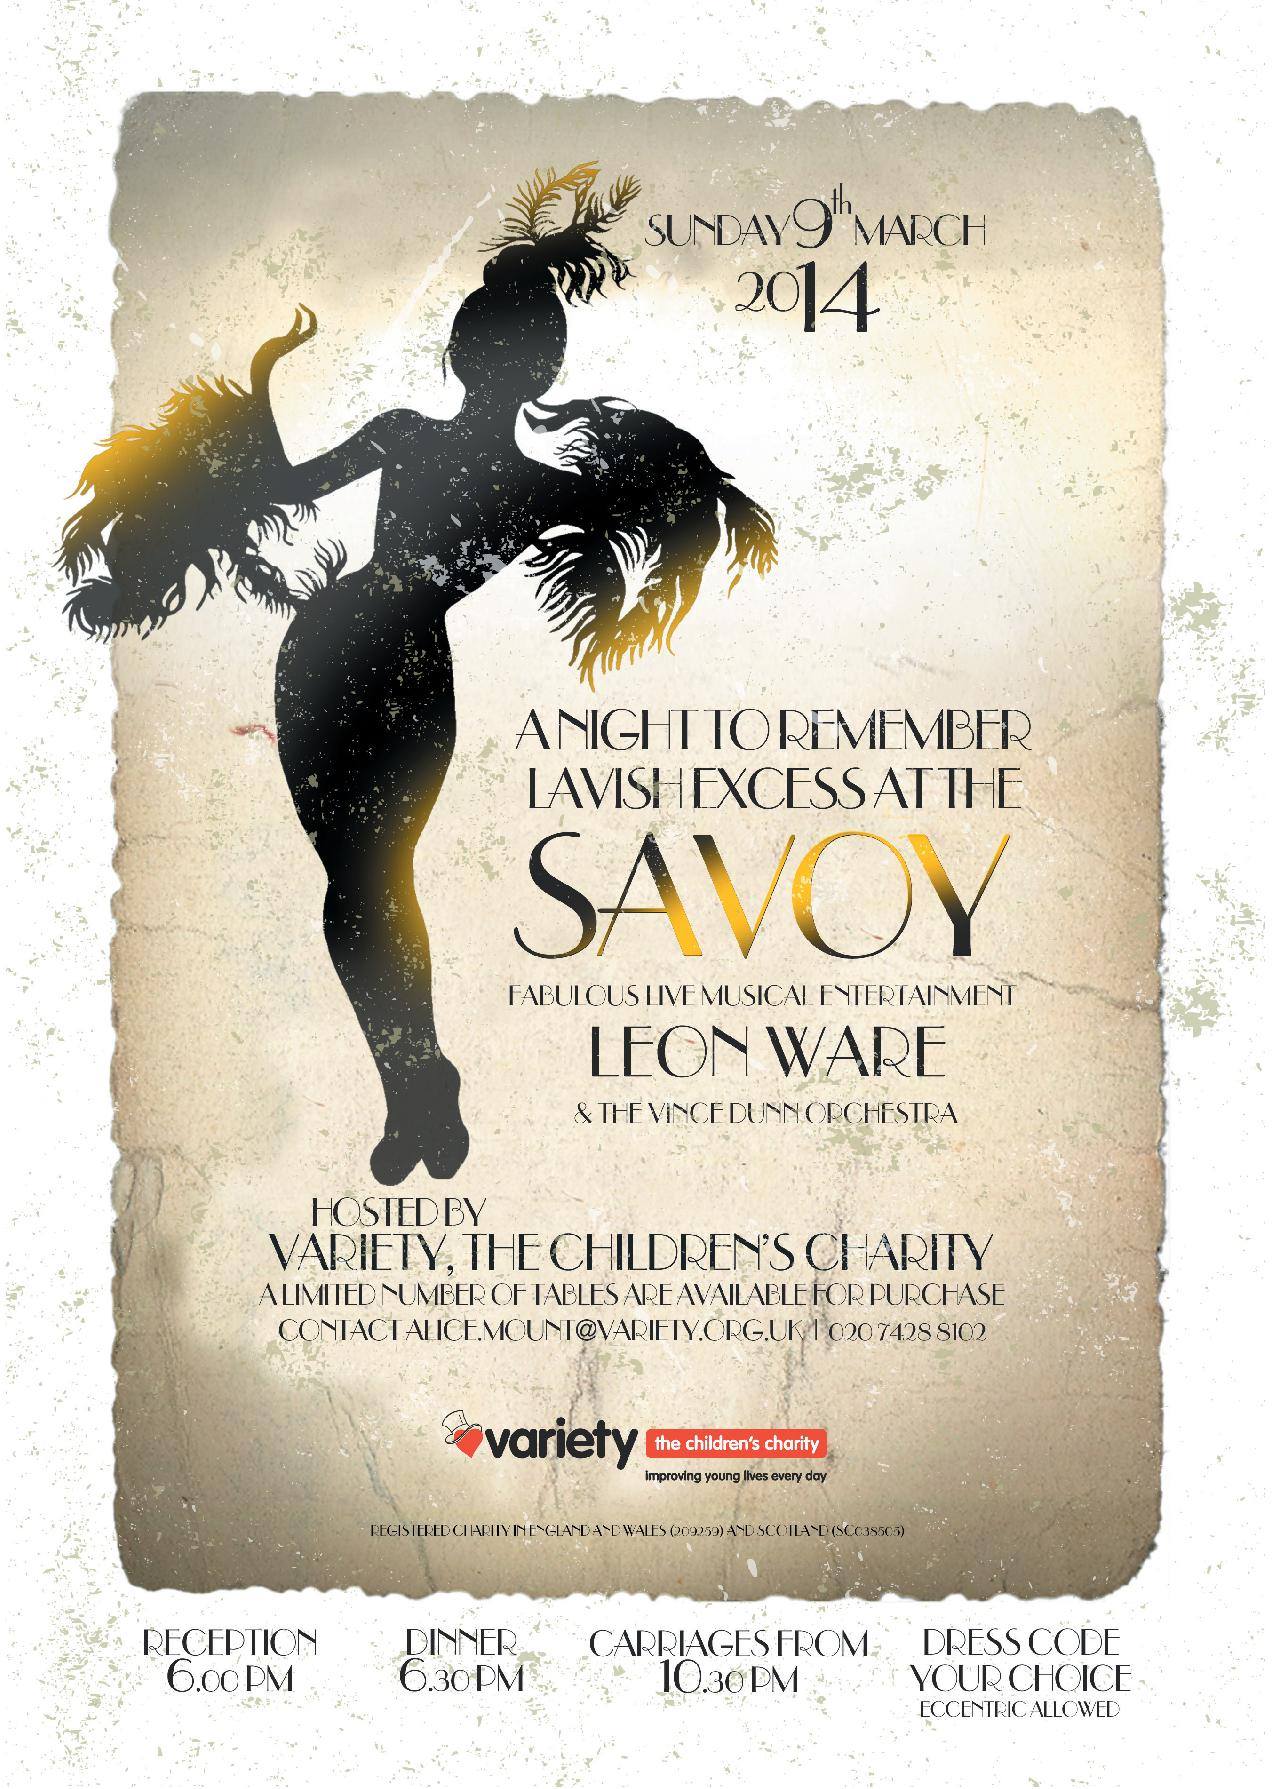 A NIGHT OF LAVISH EXCESS AT THE SAVOY